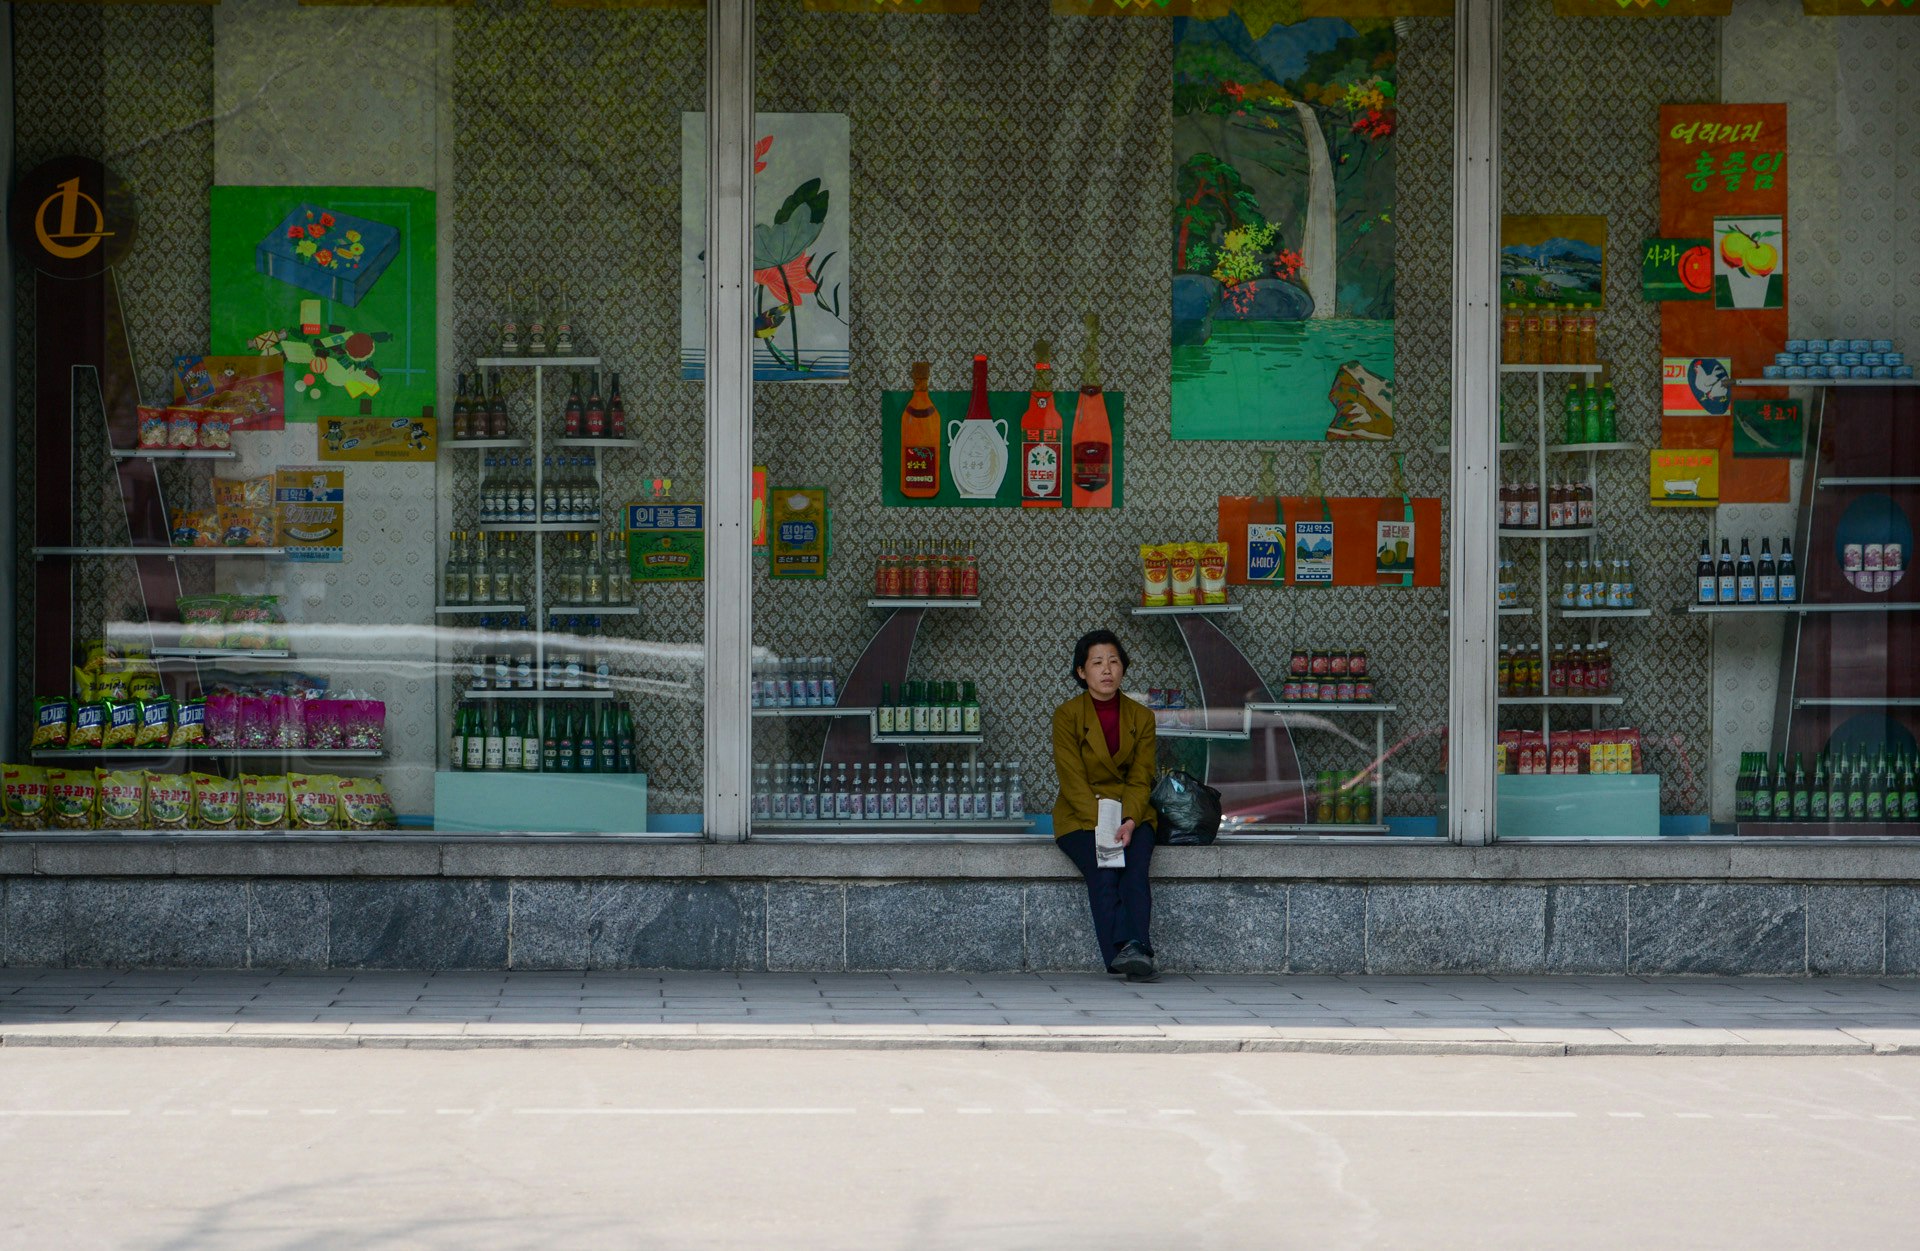 North Korean woman is relaxing on a storefront.